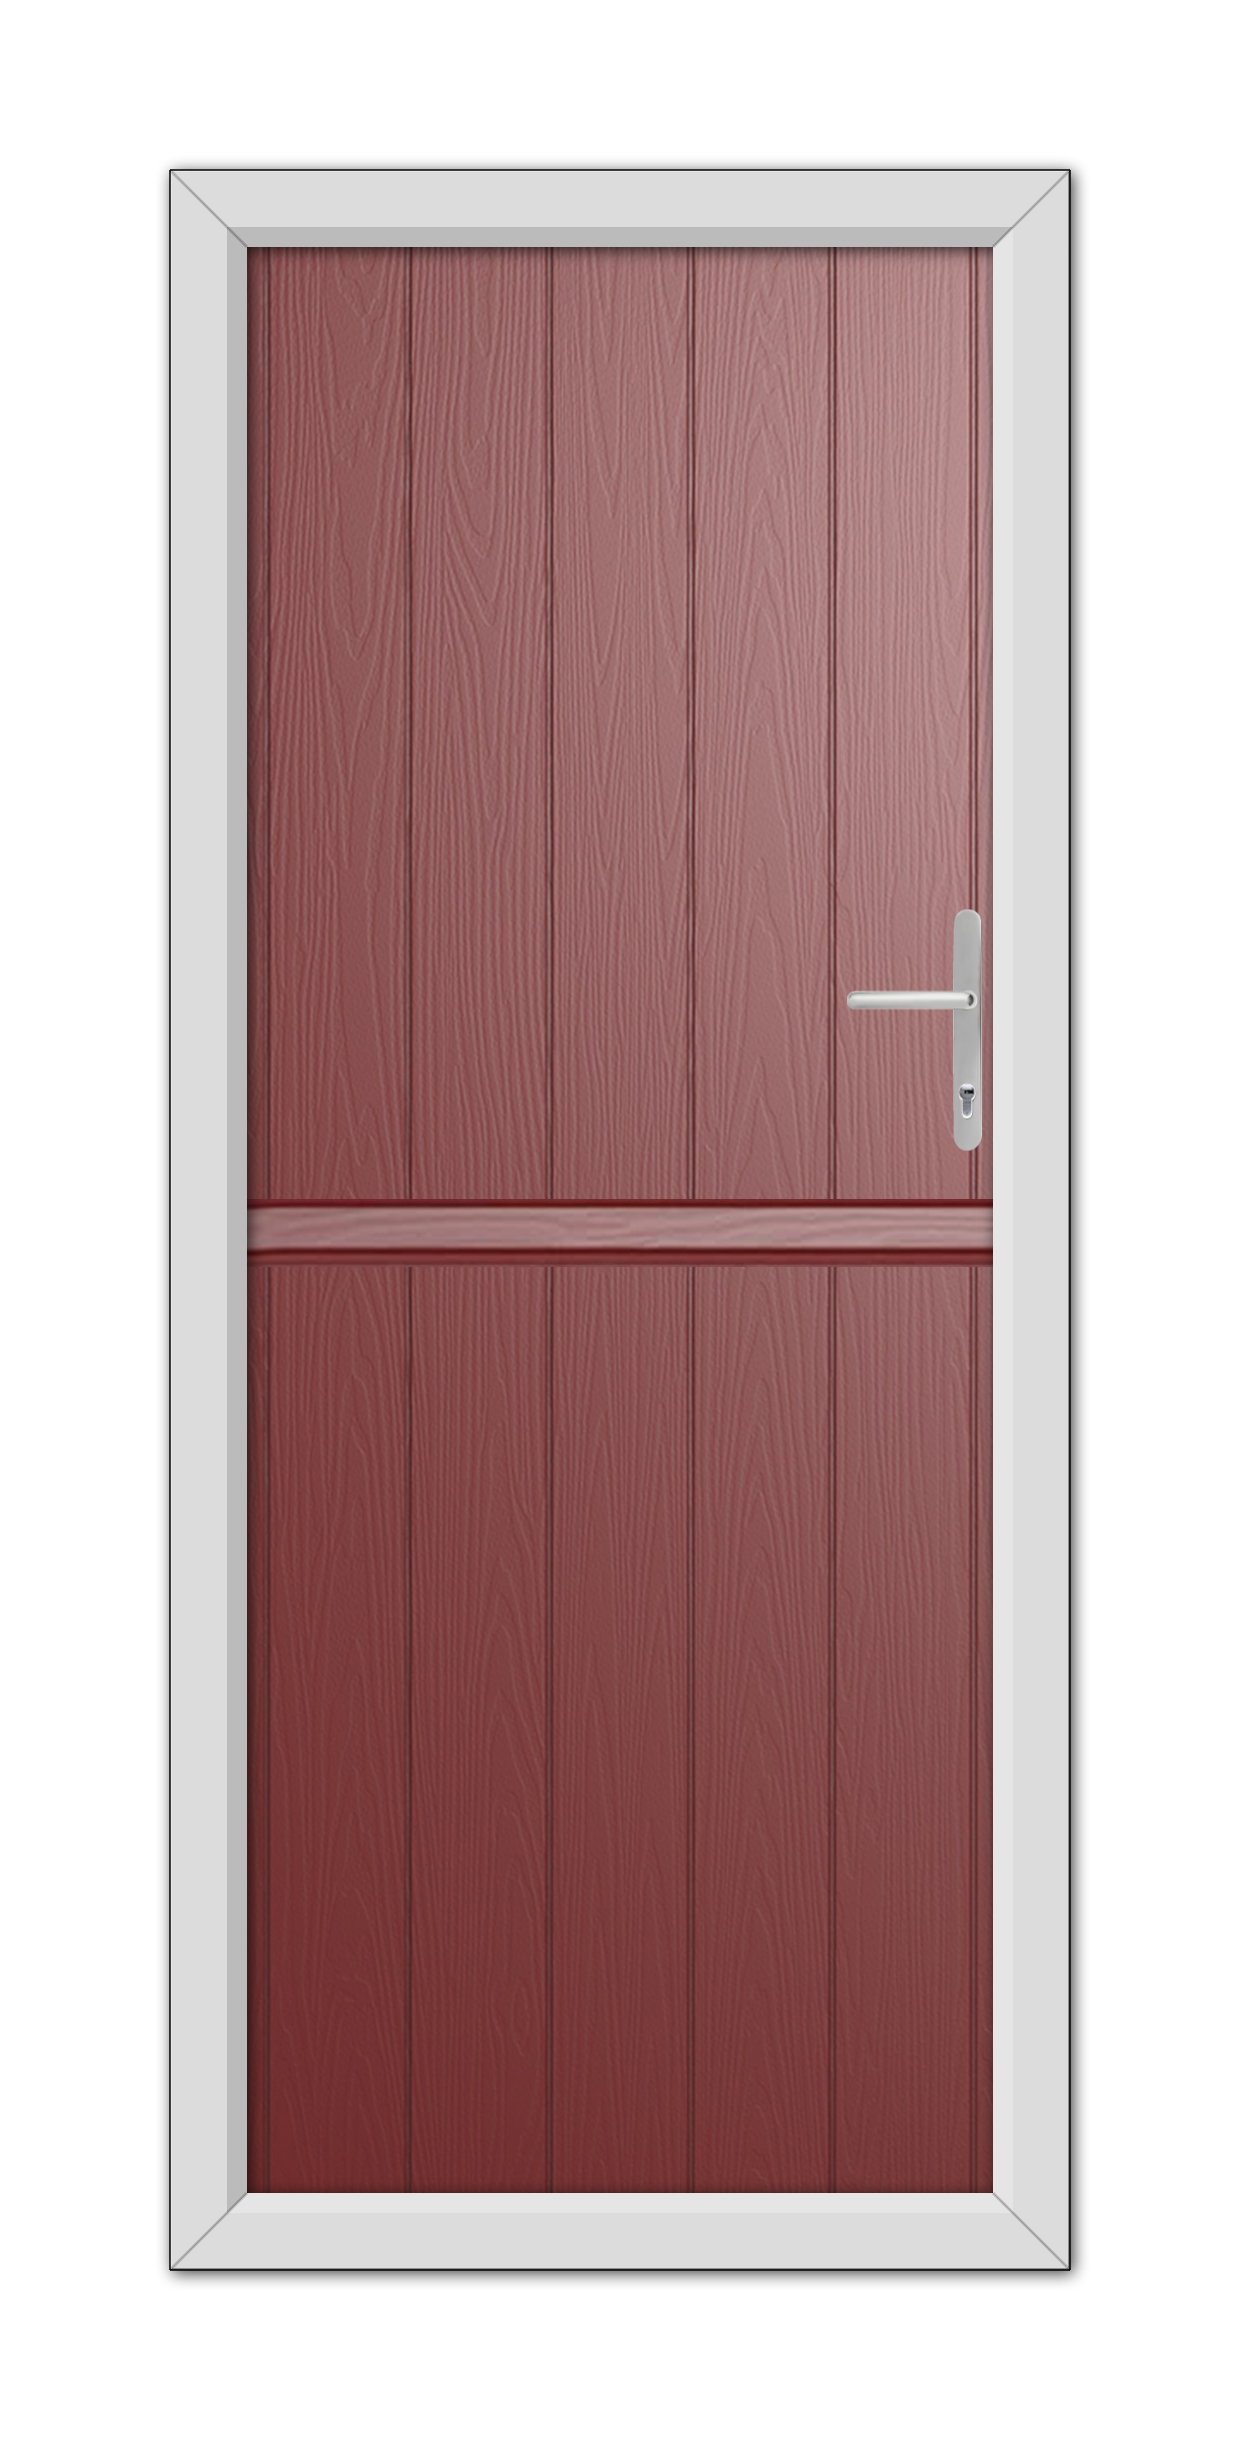 A digital illustration of a Red Gloucester Stable Composite Door with a horizontal division, framed in white, featuring a silver handle on the right side.